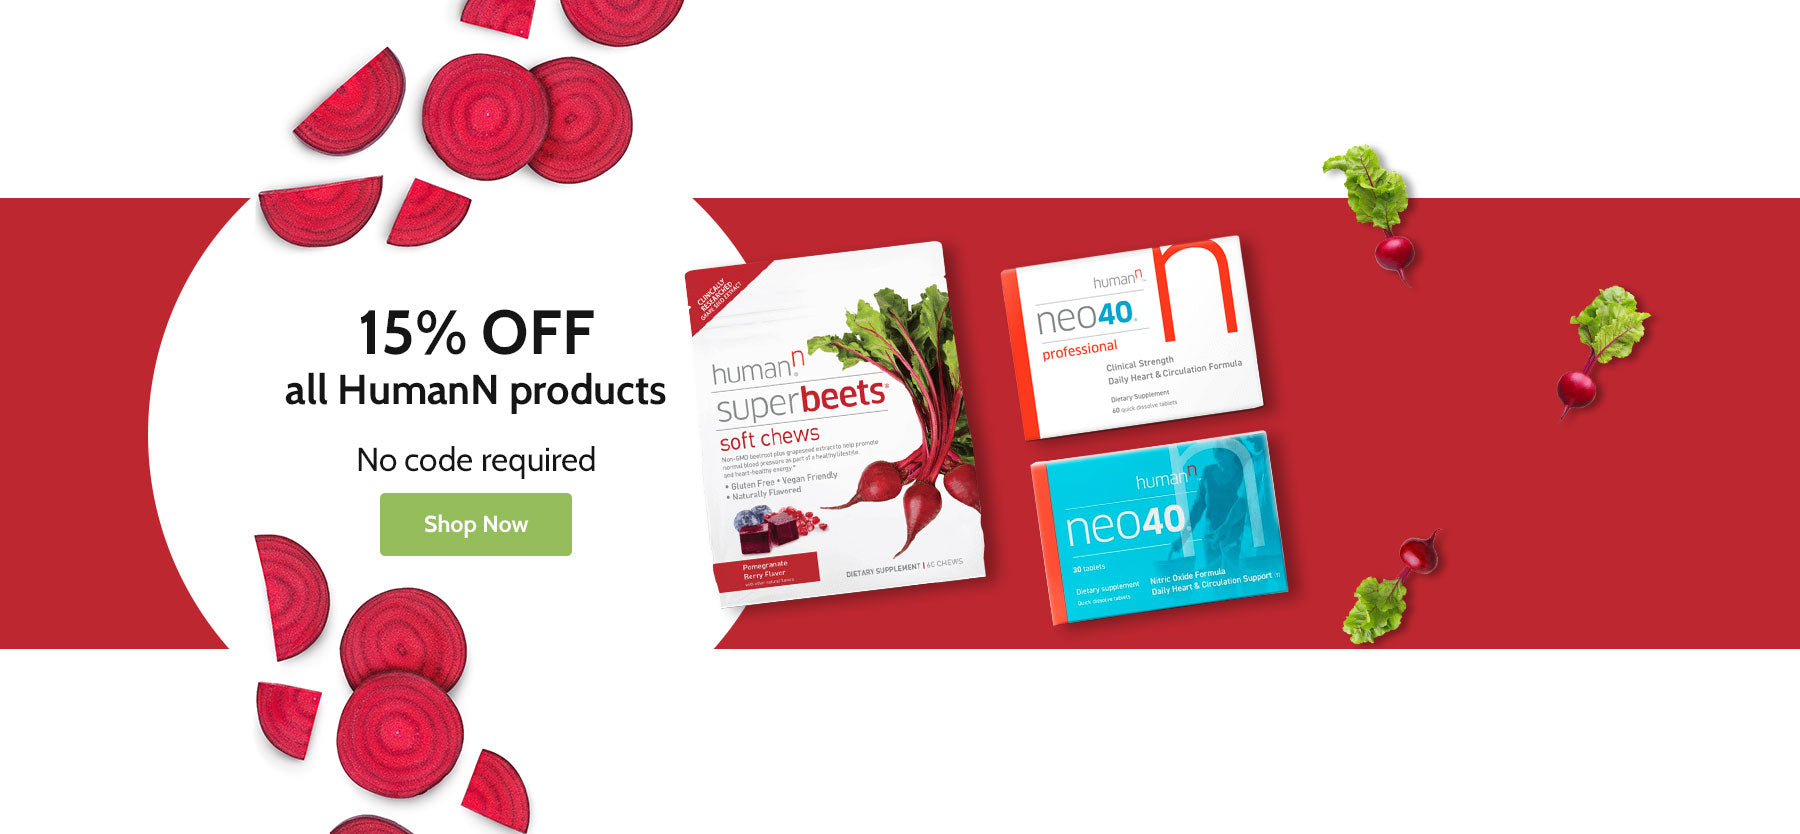 15% OFF All HumanN supplements. No discount code required. 